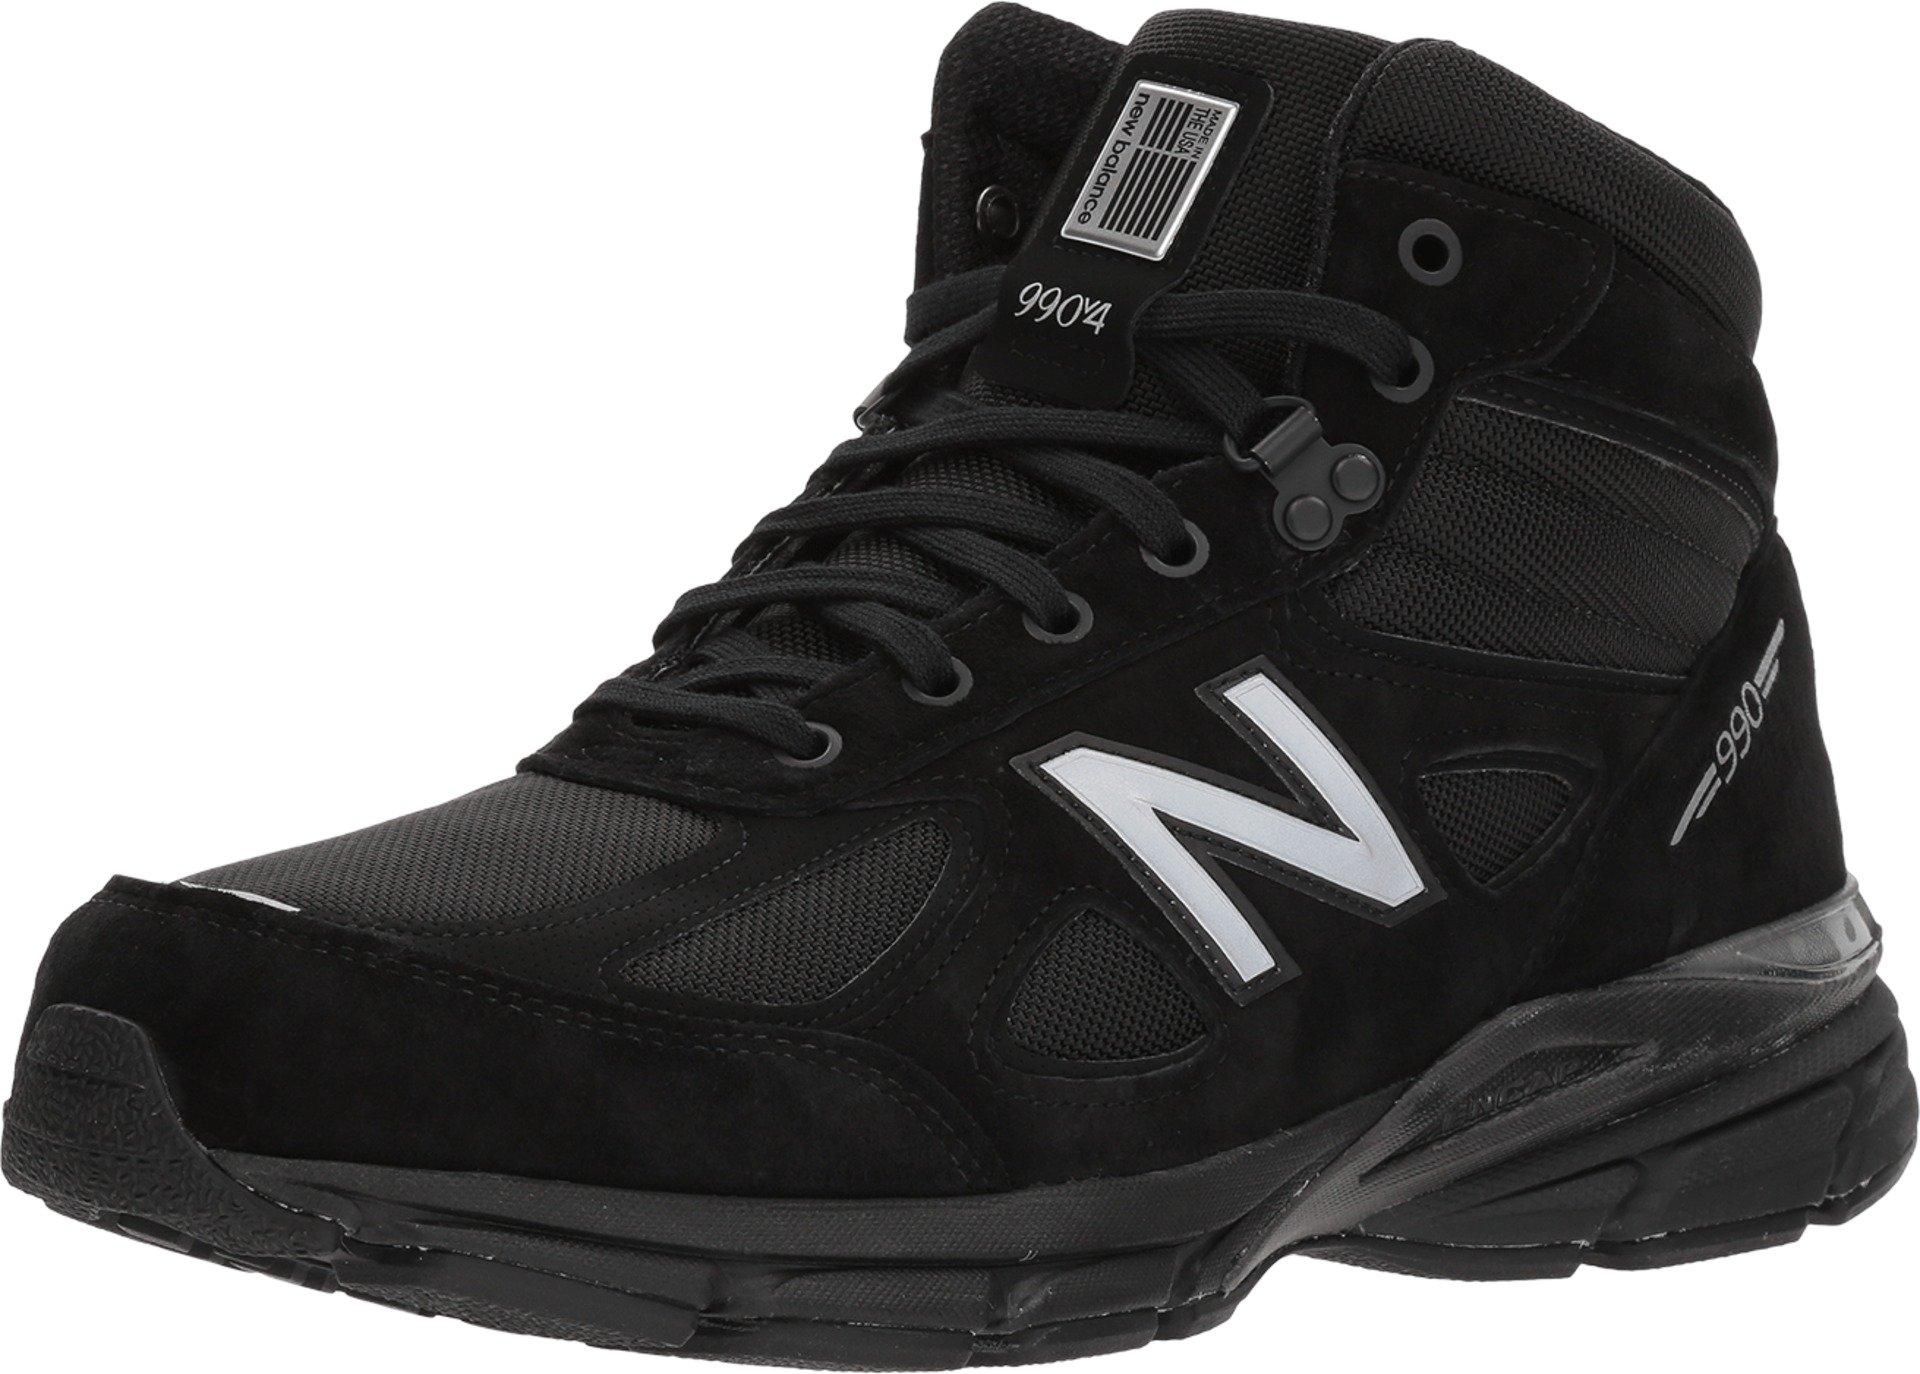  New  Balance  Rubber 990v4 Boot  black grey Pull on Boots  